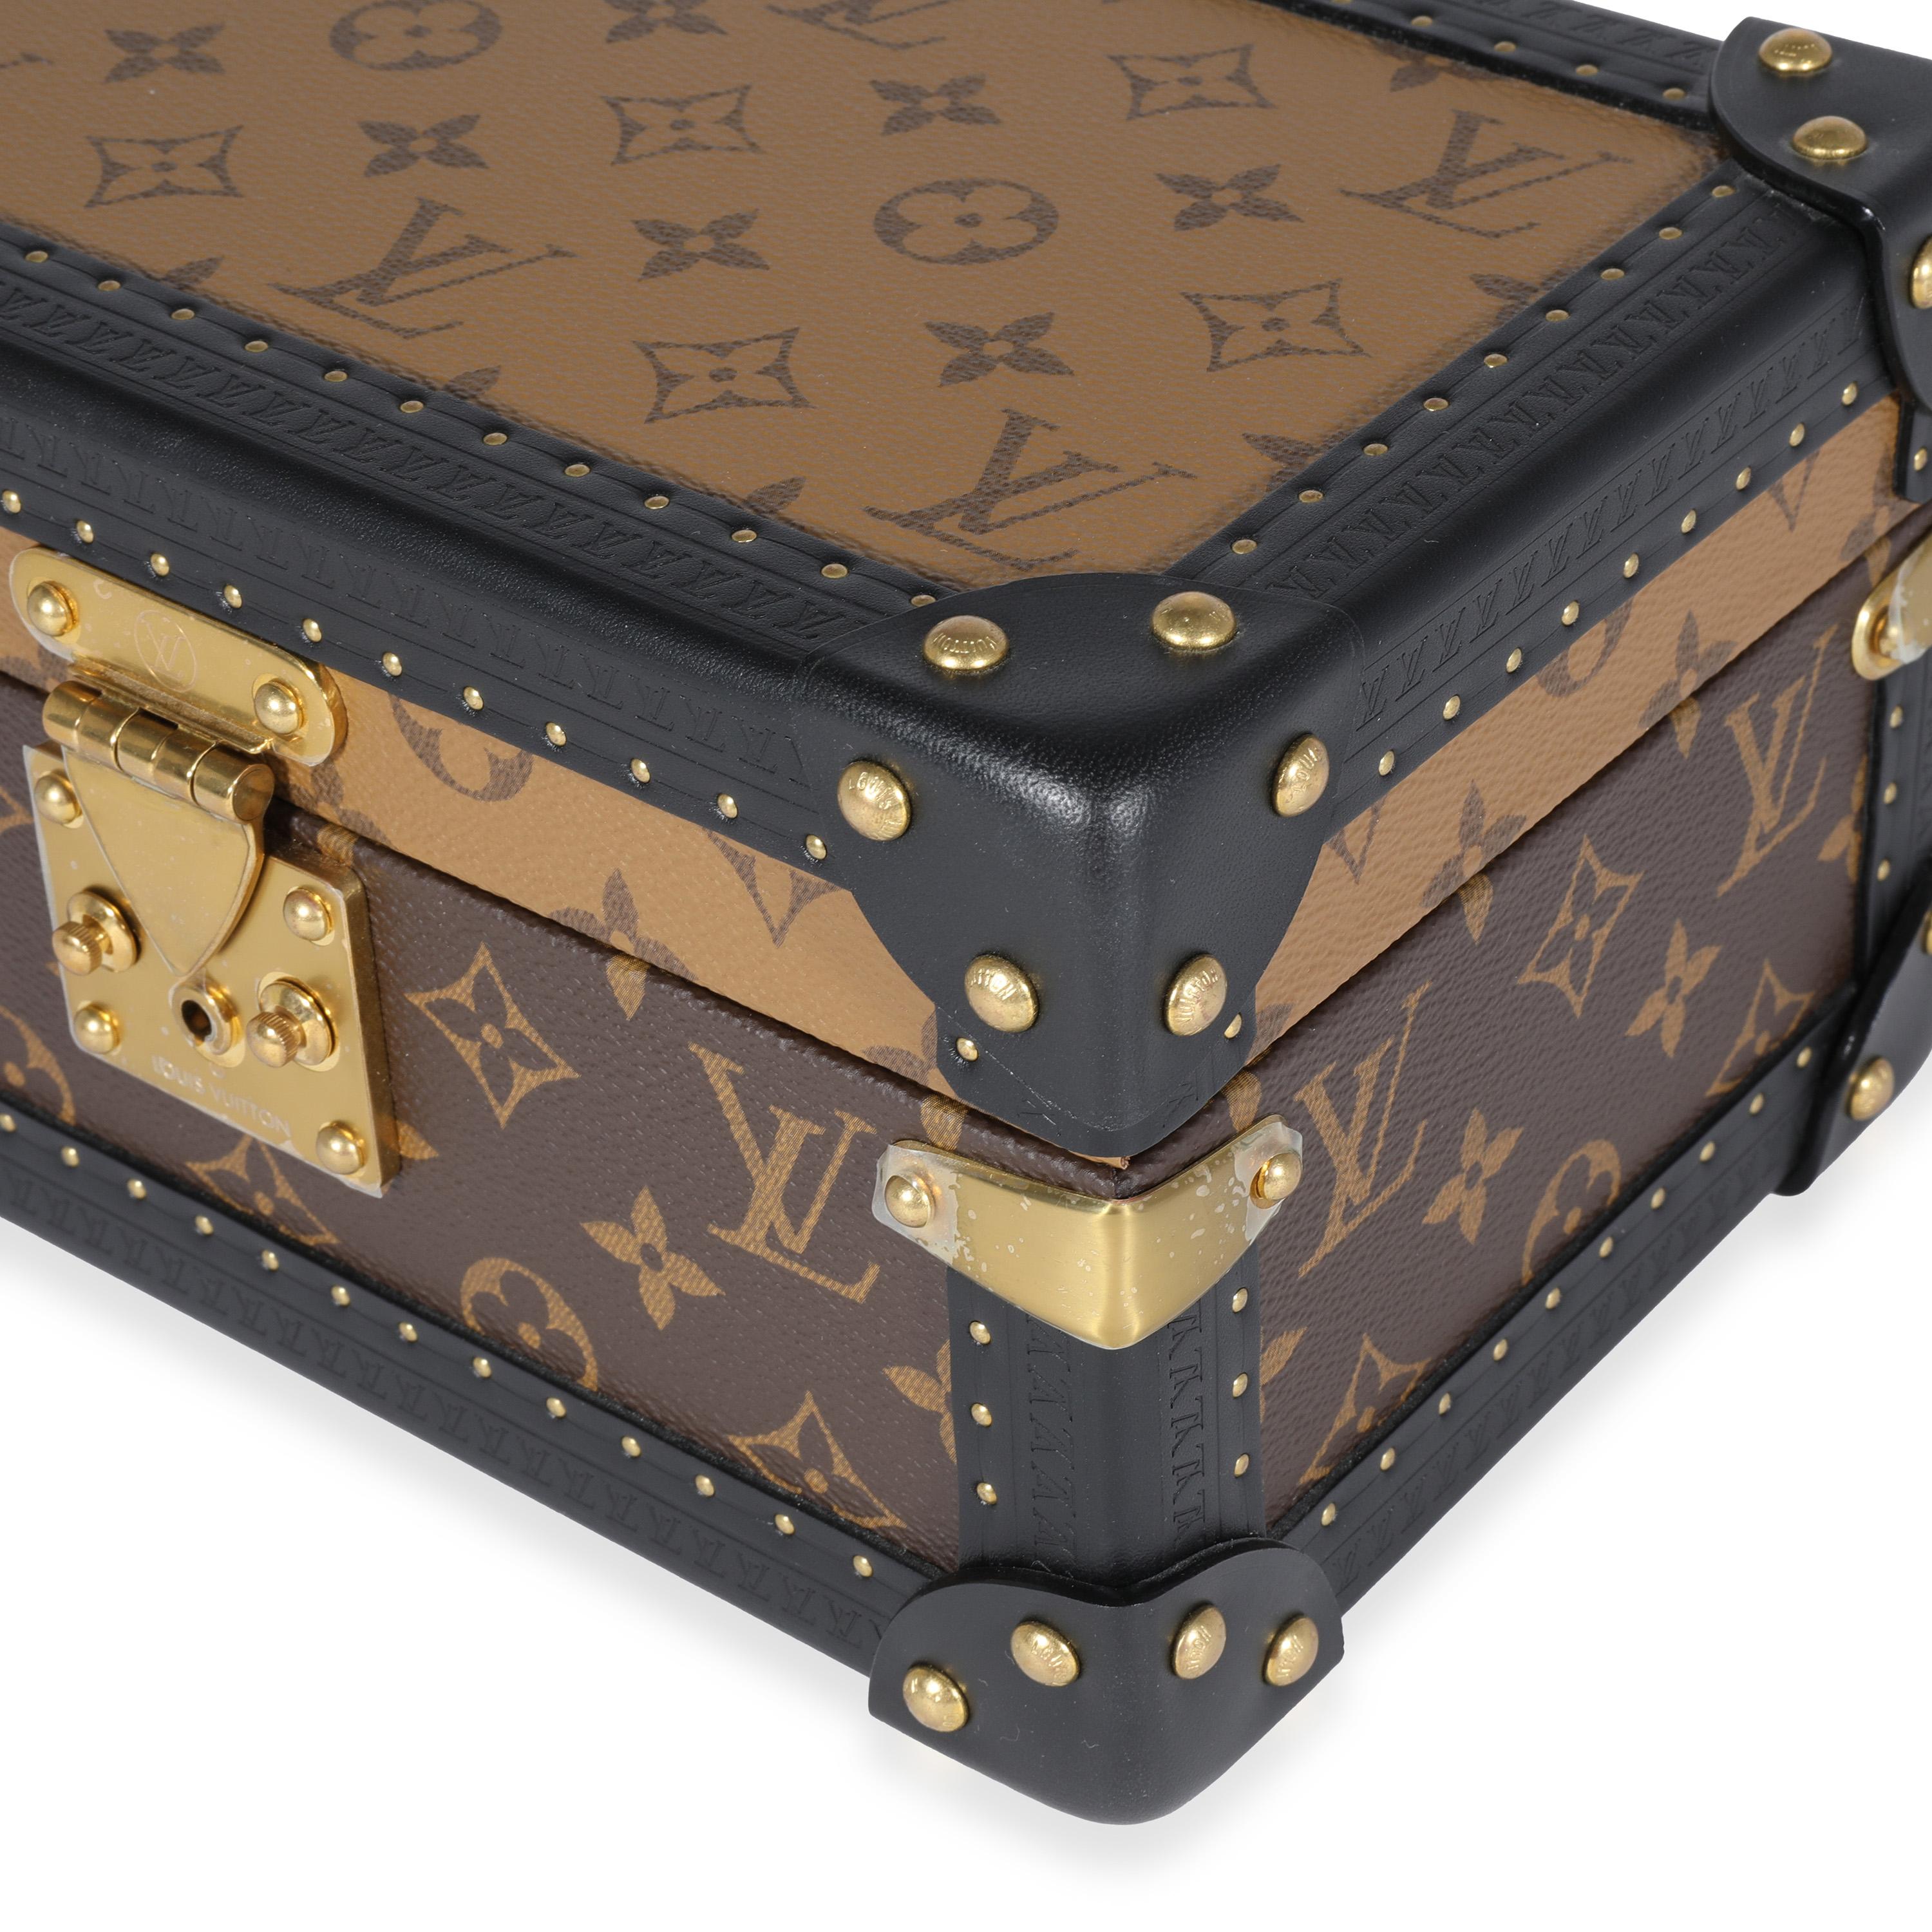 Listing Title: Louis Vuitton Monogram Reverse Canvas Coffret Tresor 24
SKU: 121902
MSRP: 5300.00
Condition: Pre-owned 
Handbag Condition: Very Good
Condition Comments: Very Good Condition. Some plastic at hardware. Minor scuffing at exterior. Minor